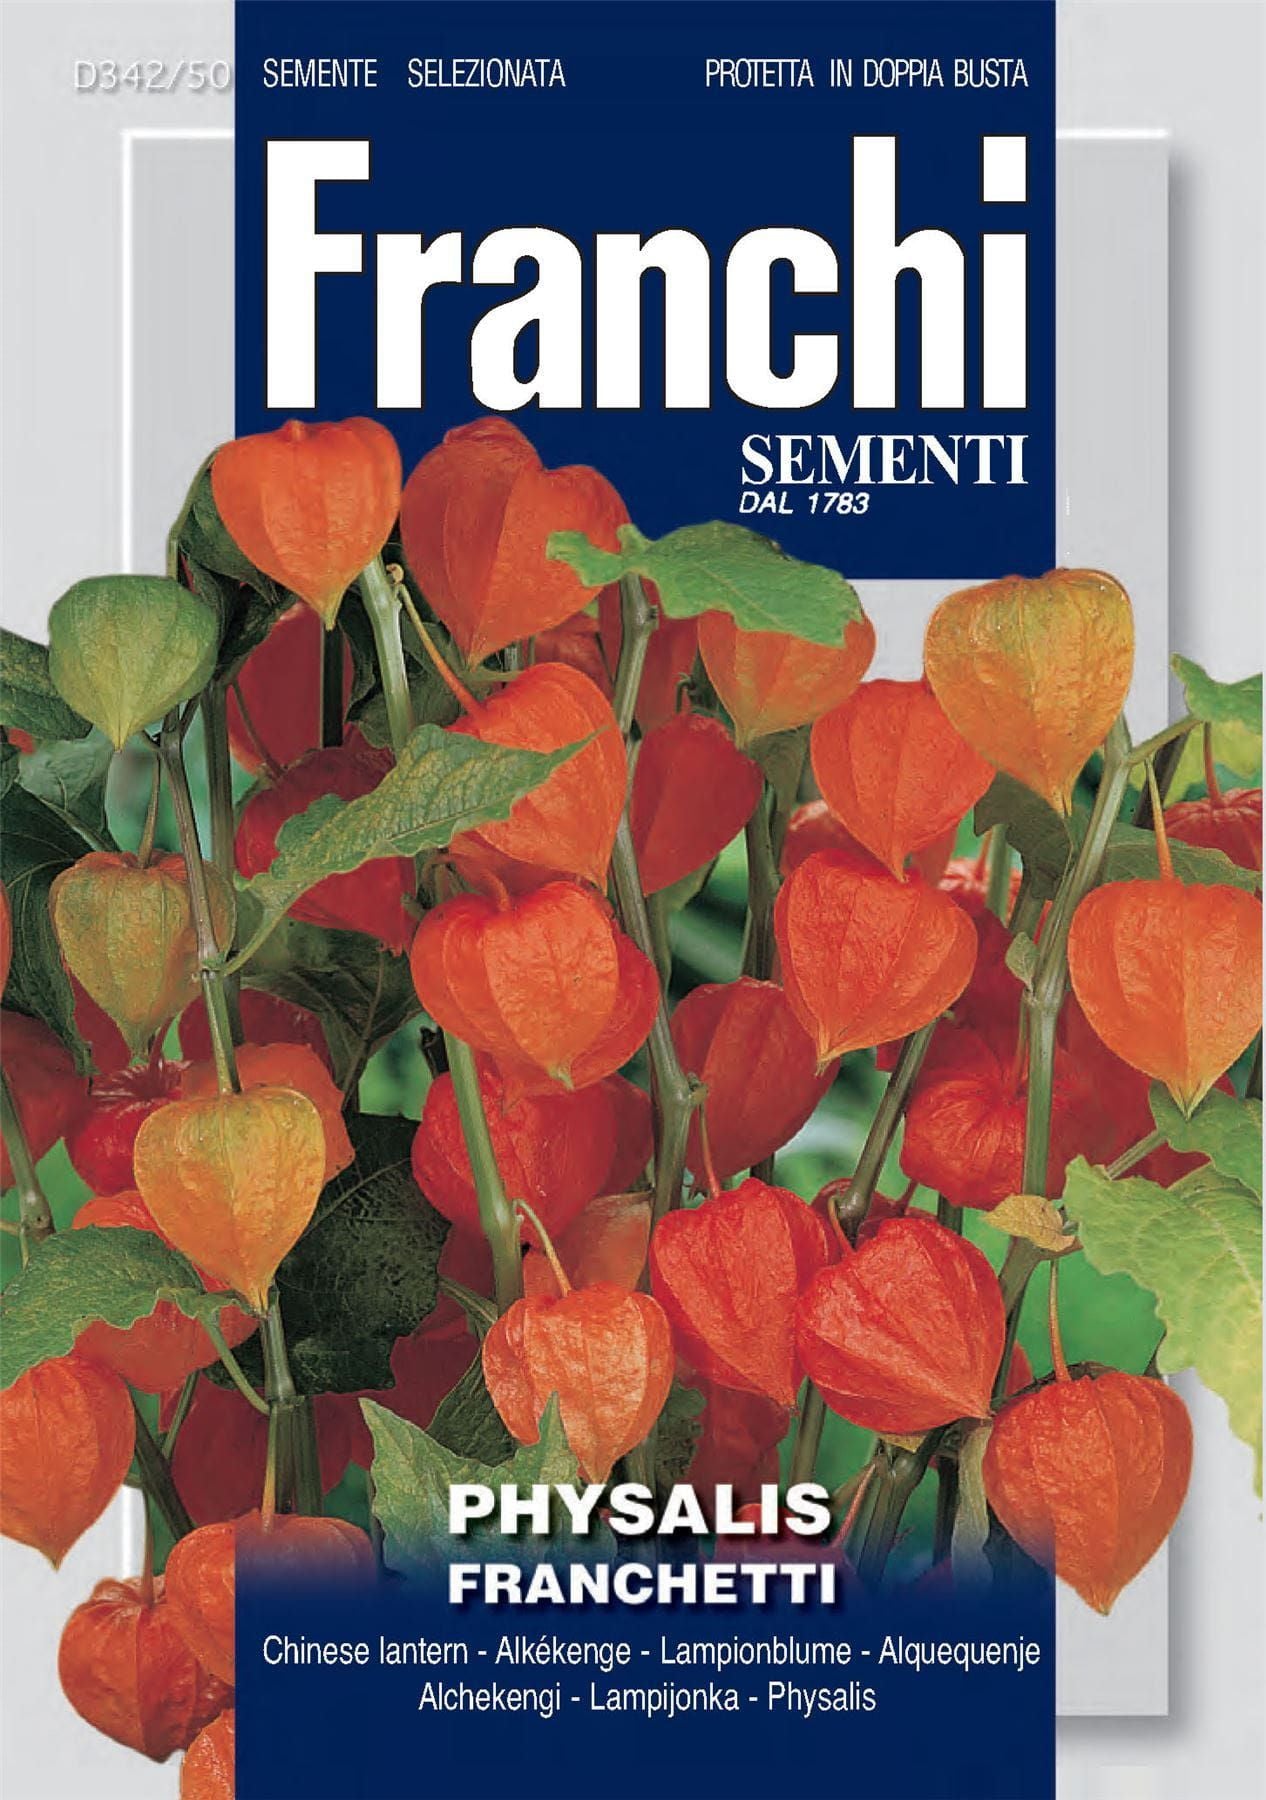 Franchi Seeds of Italy - Flower - FDBF_ 342-50 - Physalis Franchetti - Seeds